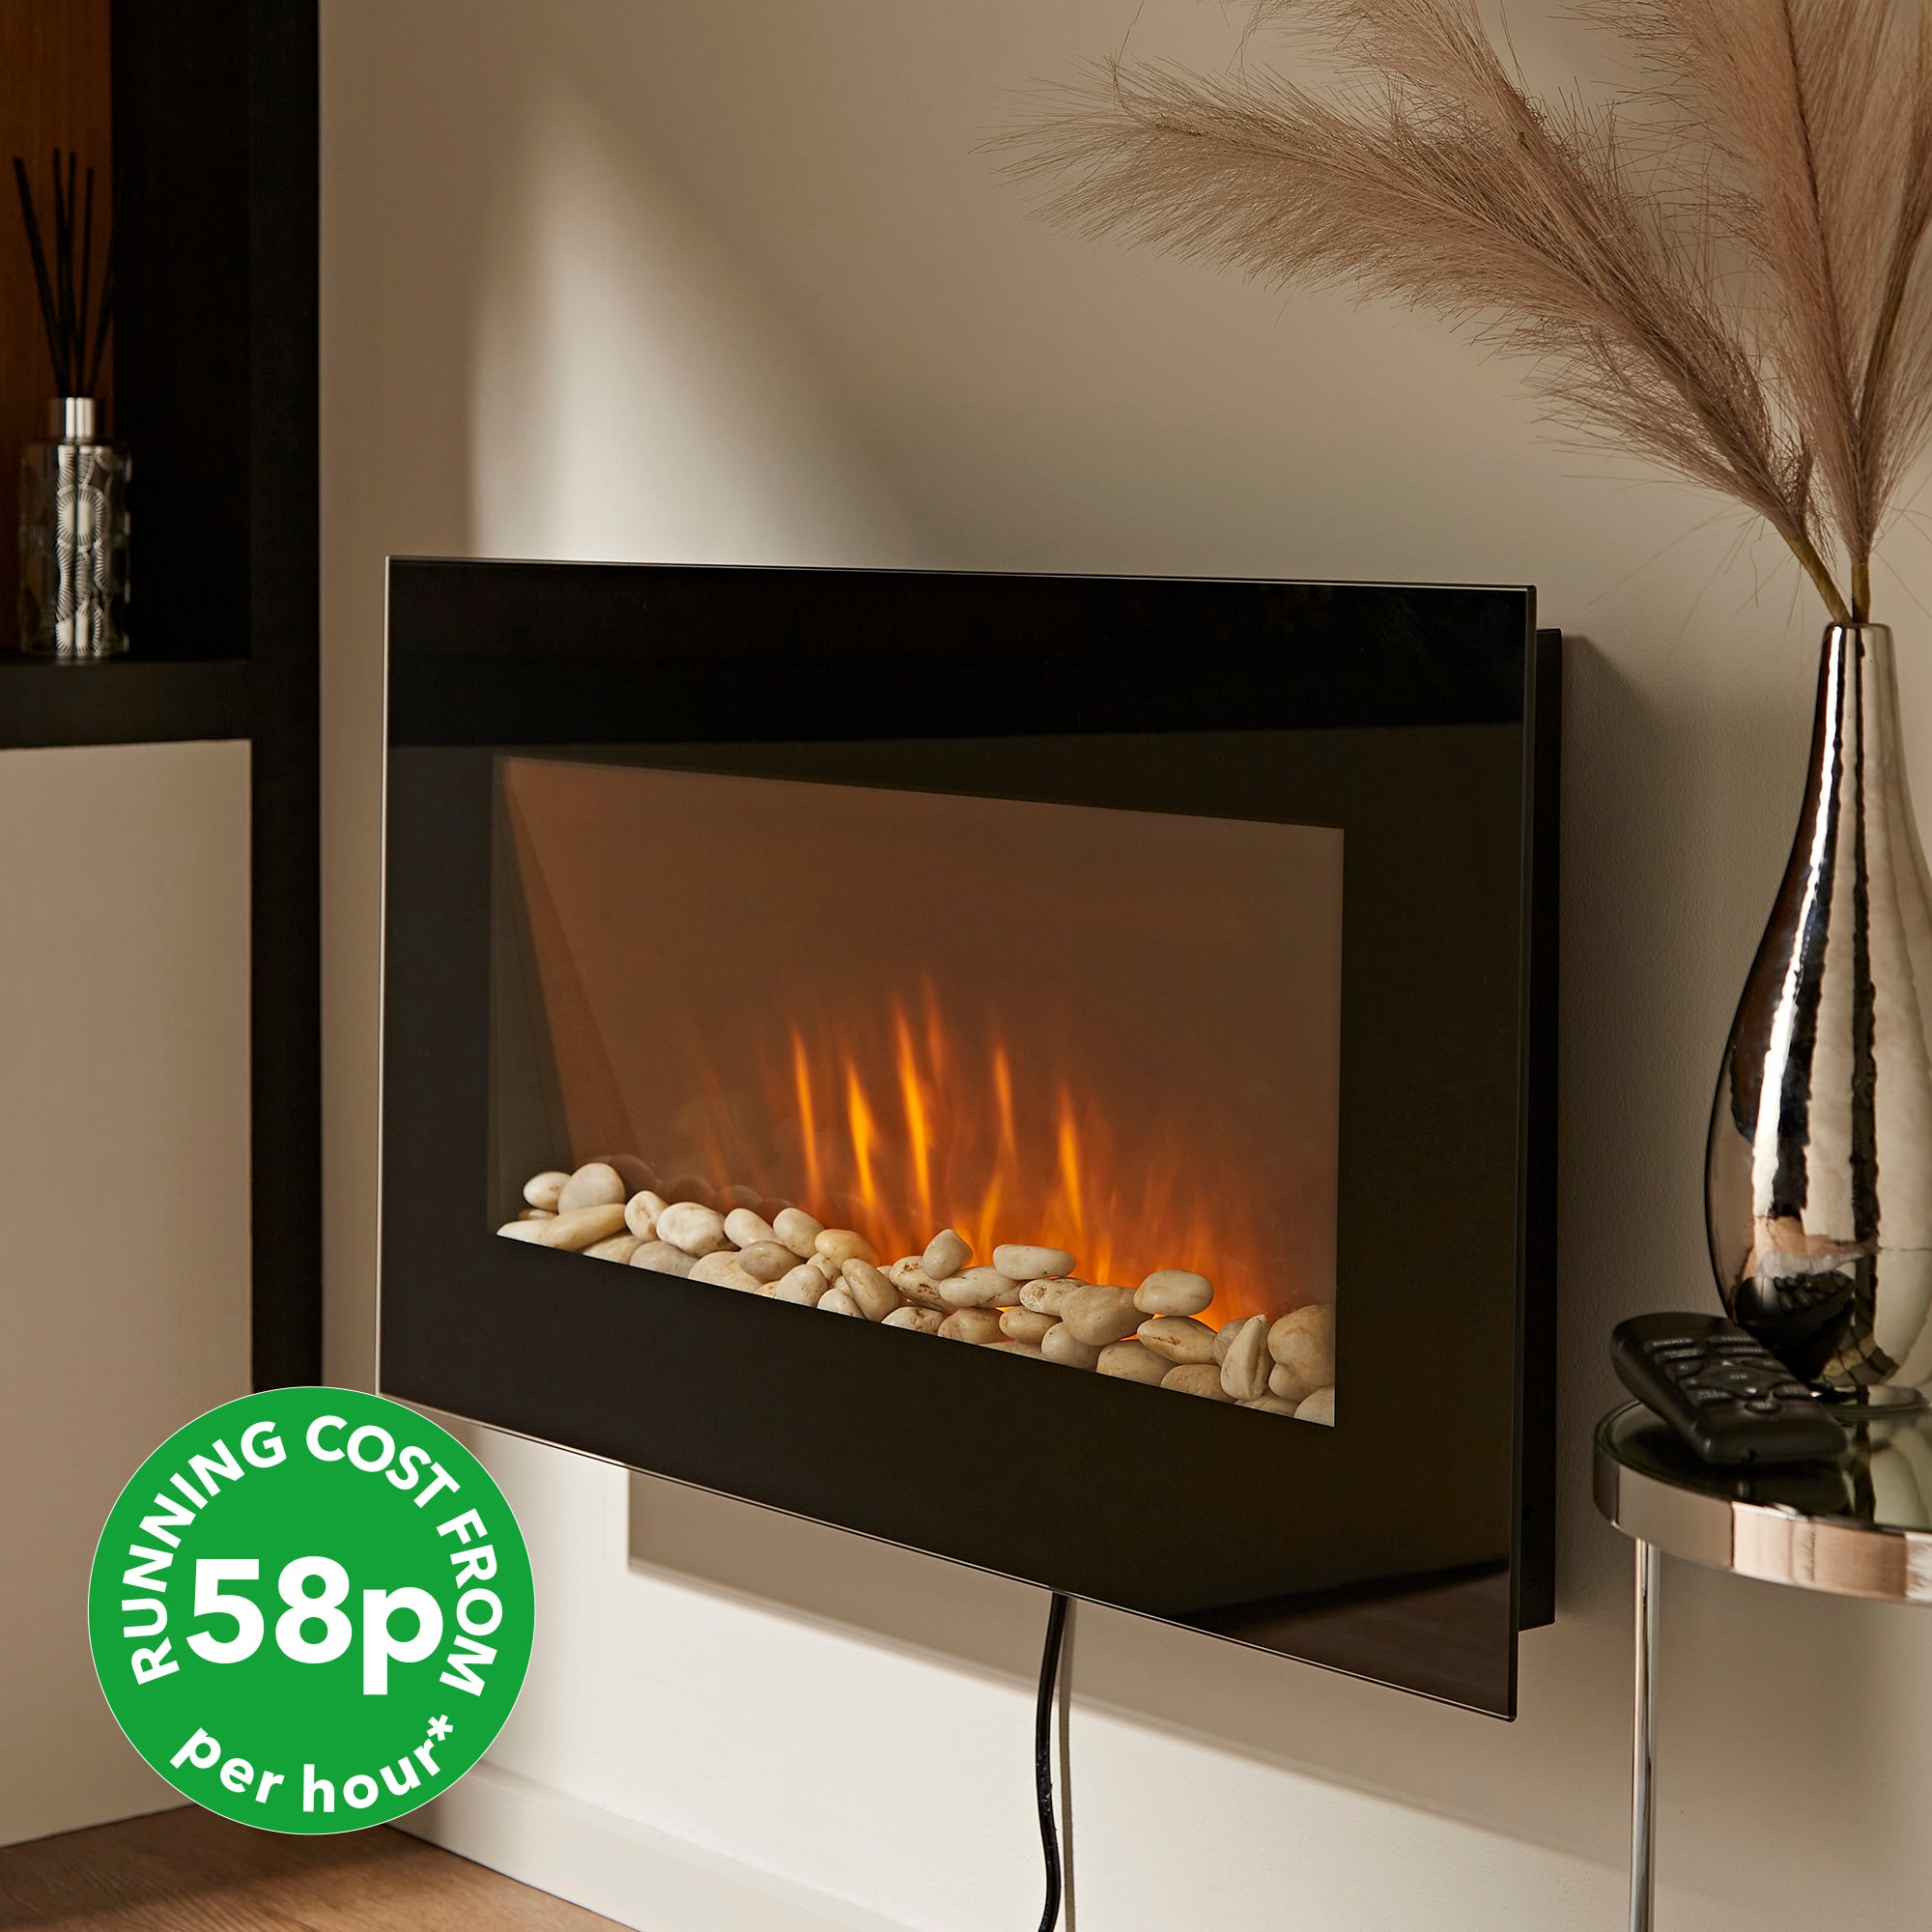 Dunelm Black Wall Mounted Electric Fire With Pebbles, 45.5cm x 78.5cm x 16.5cm Black